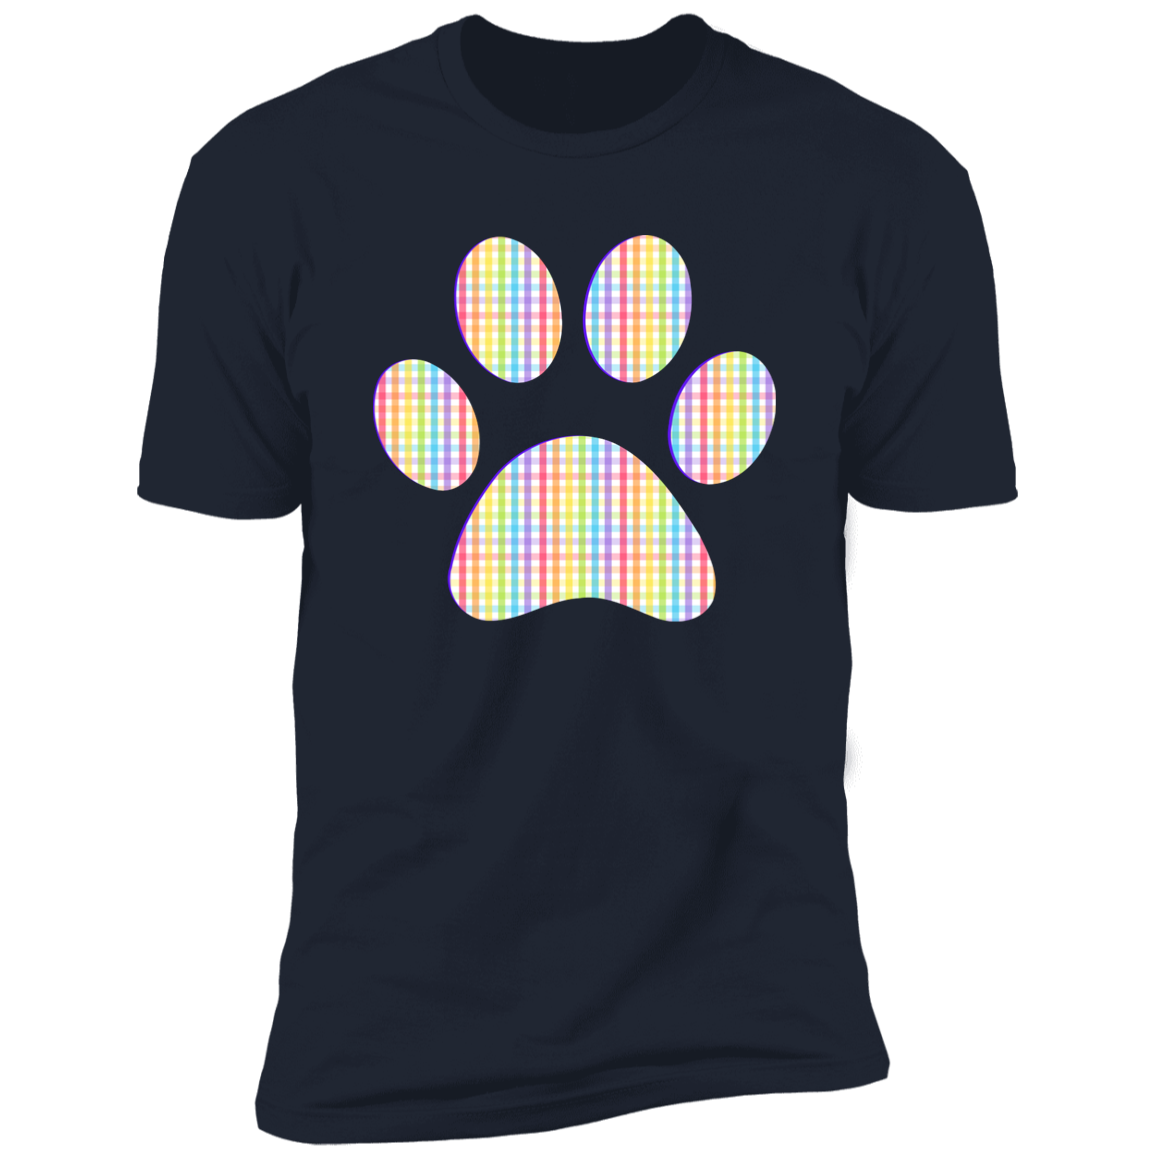 Pride Paw (Gingham) Pride T-shirt, Paw Pride Dog Shirt for humans, in navy blue